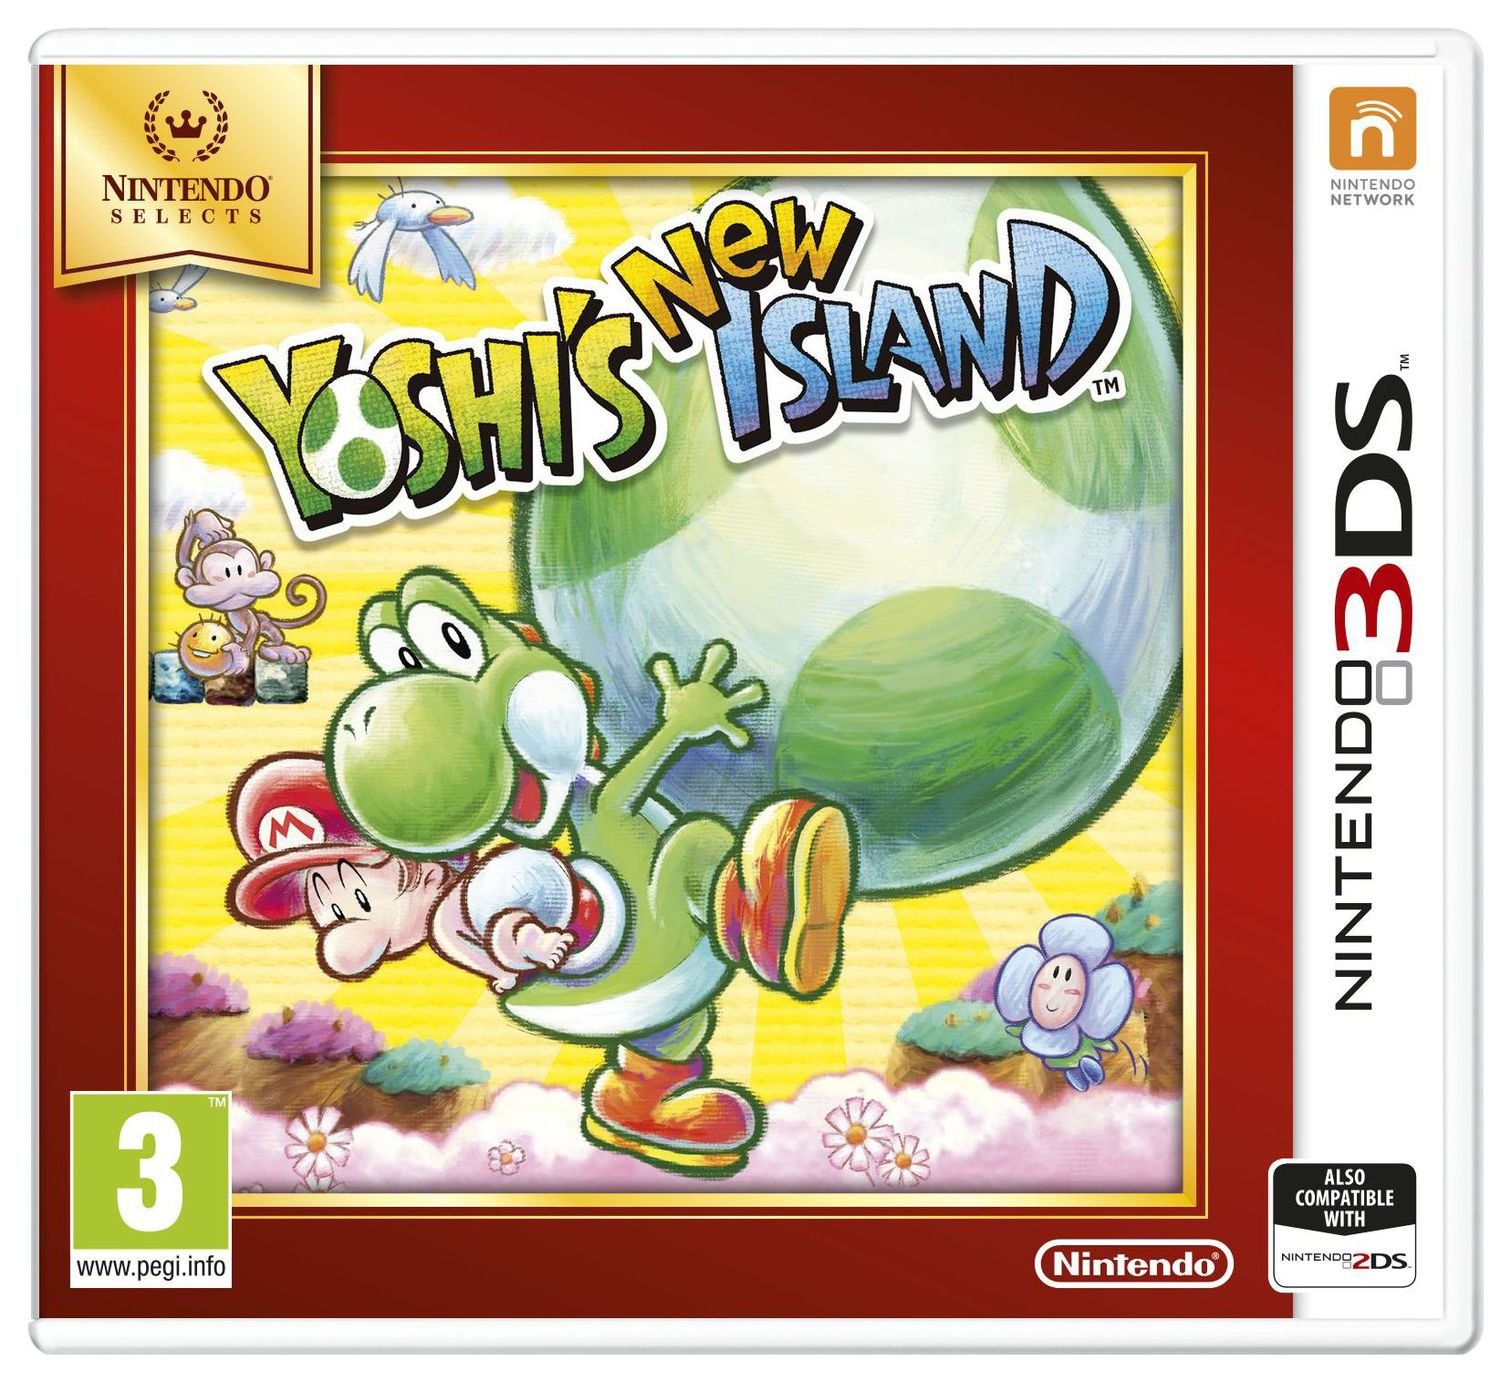 Yoshis Island Nintendo Selects 3DS Game Review